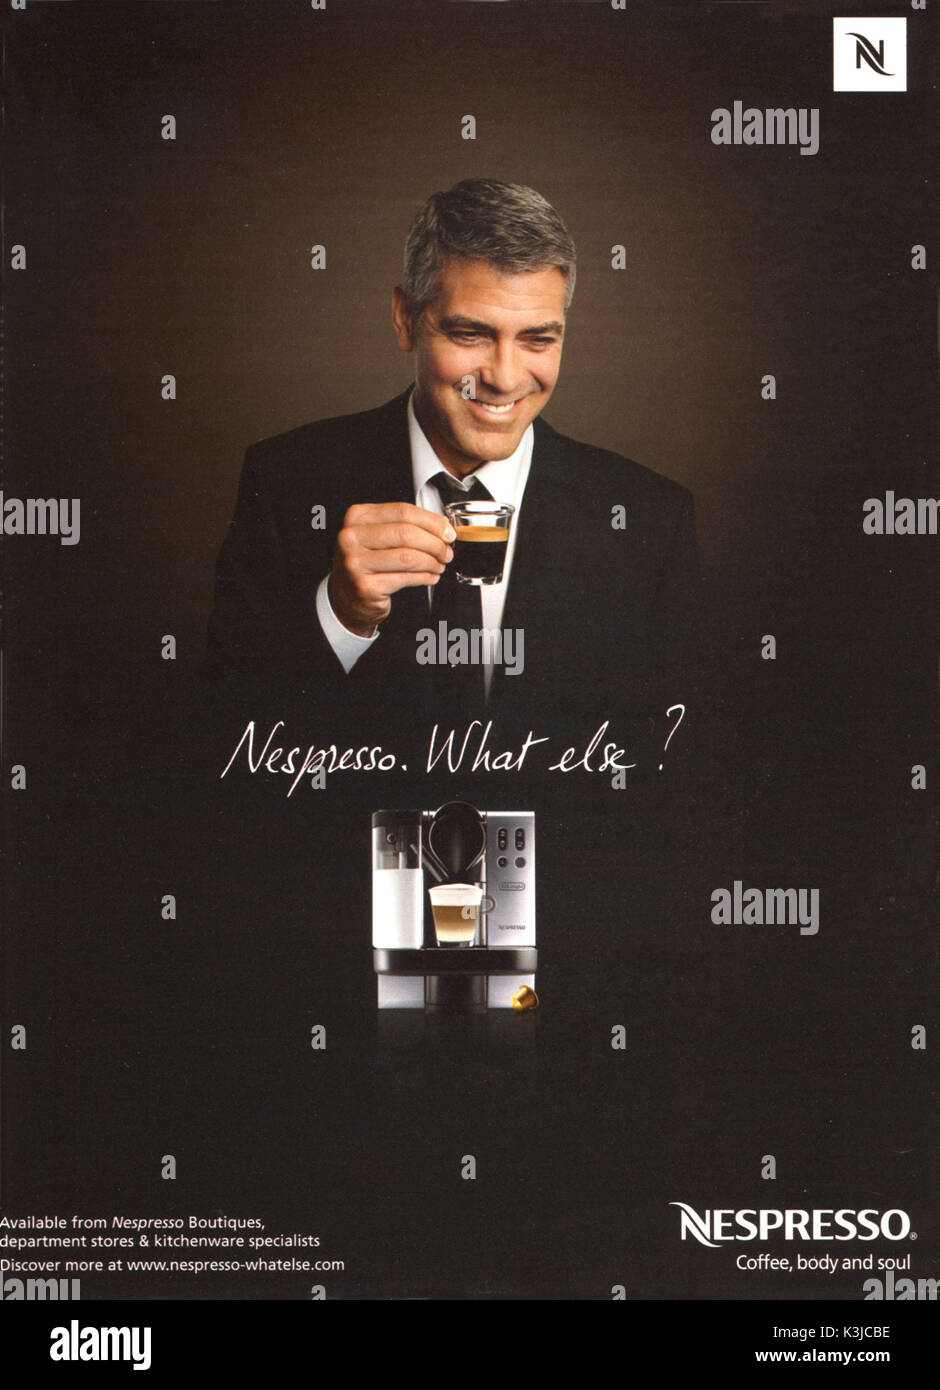 NESPRESSO ADVERTISEMENT with GEORGE CLOONEY Date: 2008 Stock Photo - Alamy